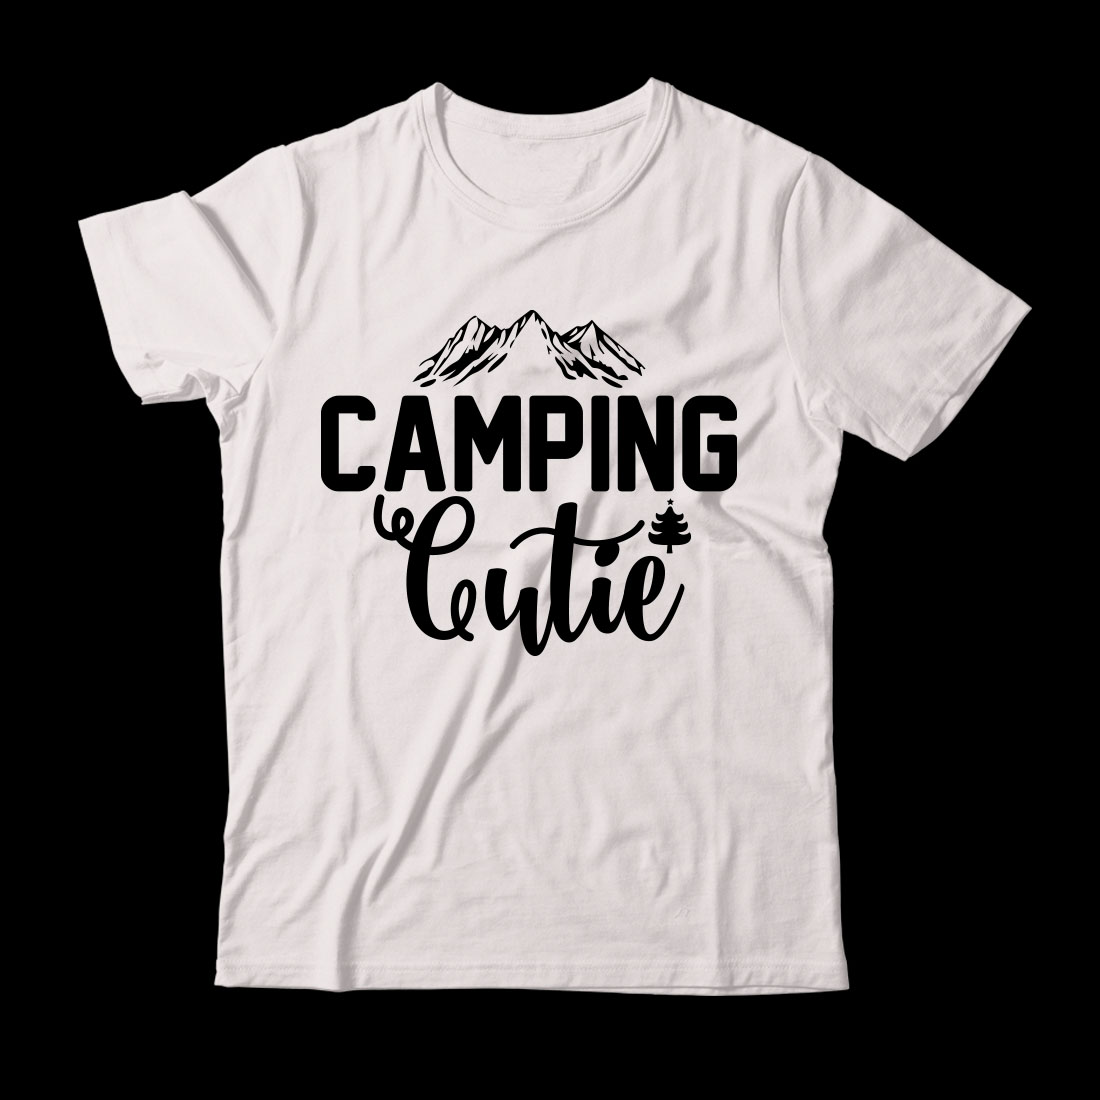 White t - shirt that says camping is cute.